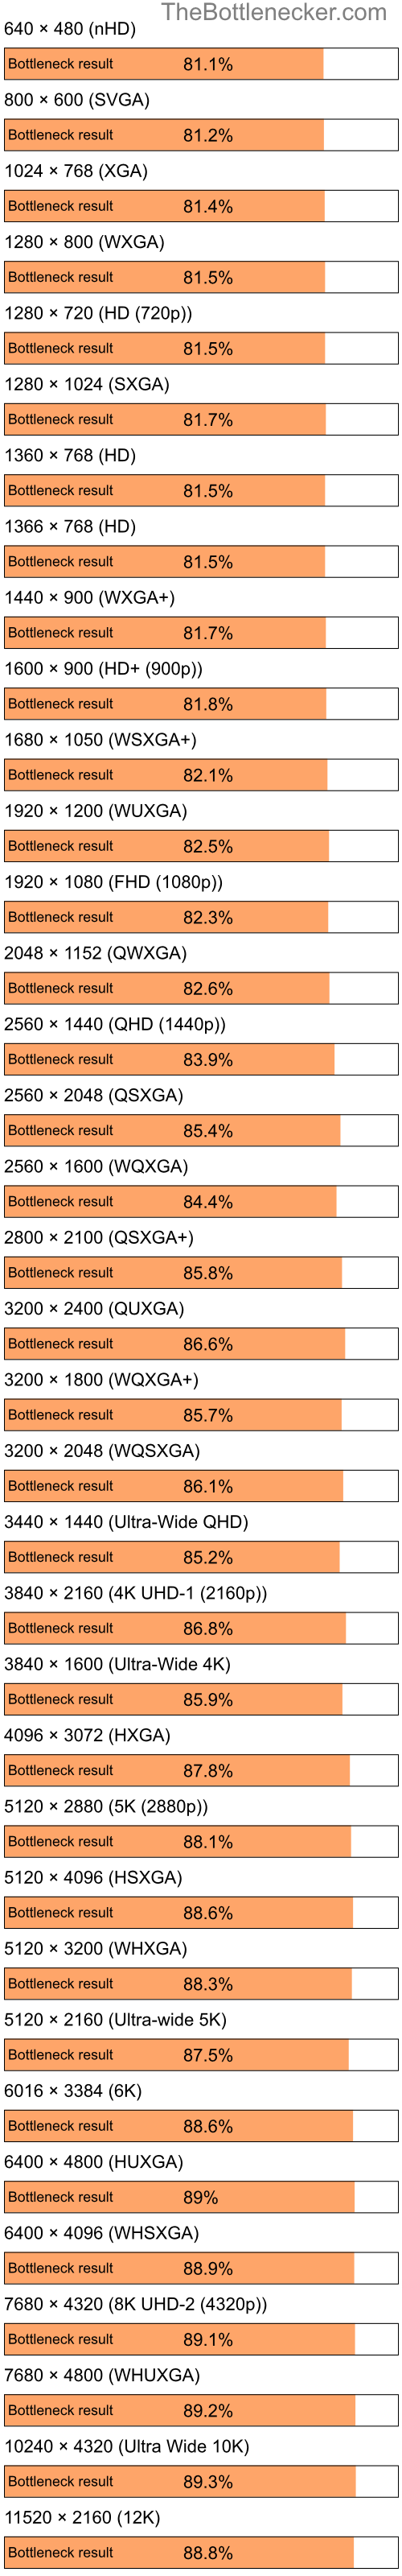 Bottleneck results by resolution for Intel Pentium 4 and NVIDIA GeForce 6500 in Graphic Card Intense Tasks